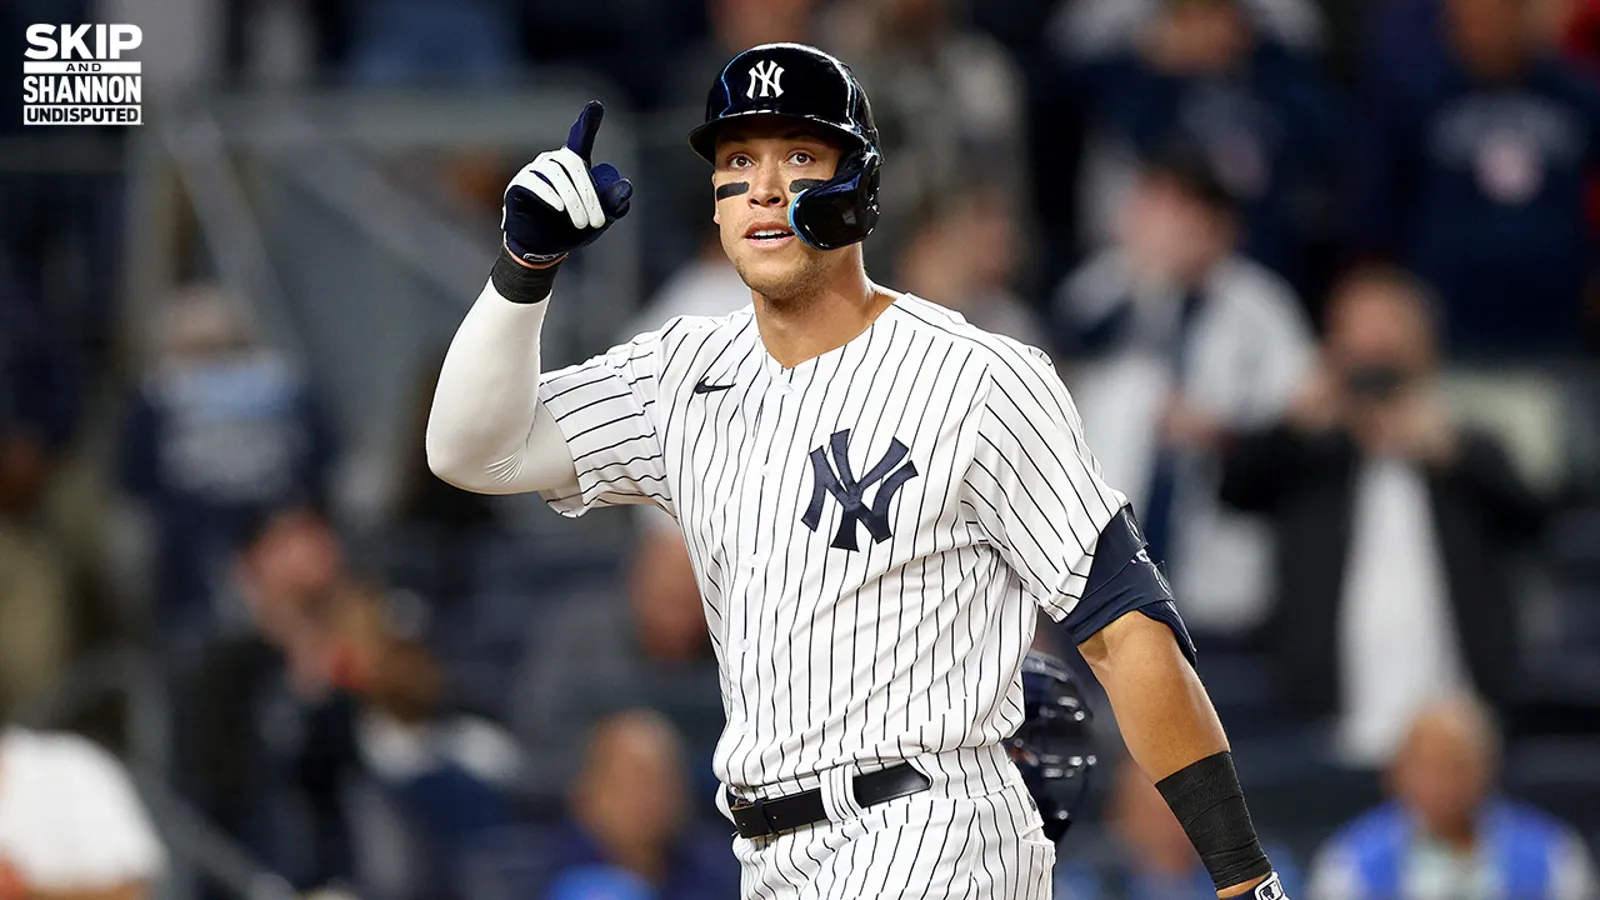 Aaron Judge tied the AL record one home run shy